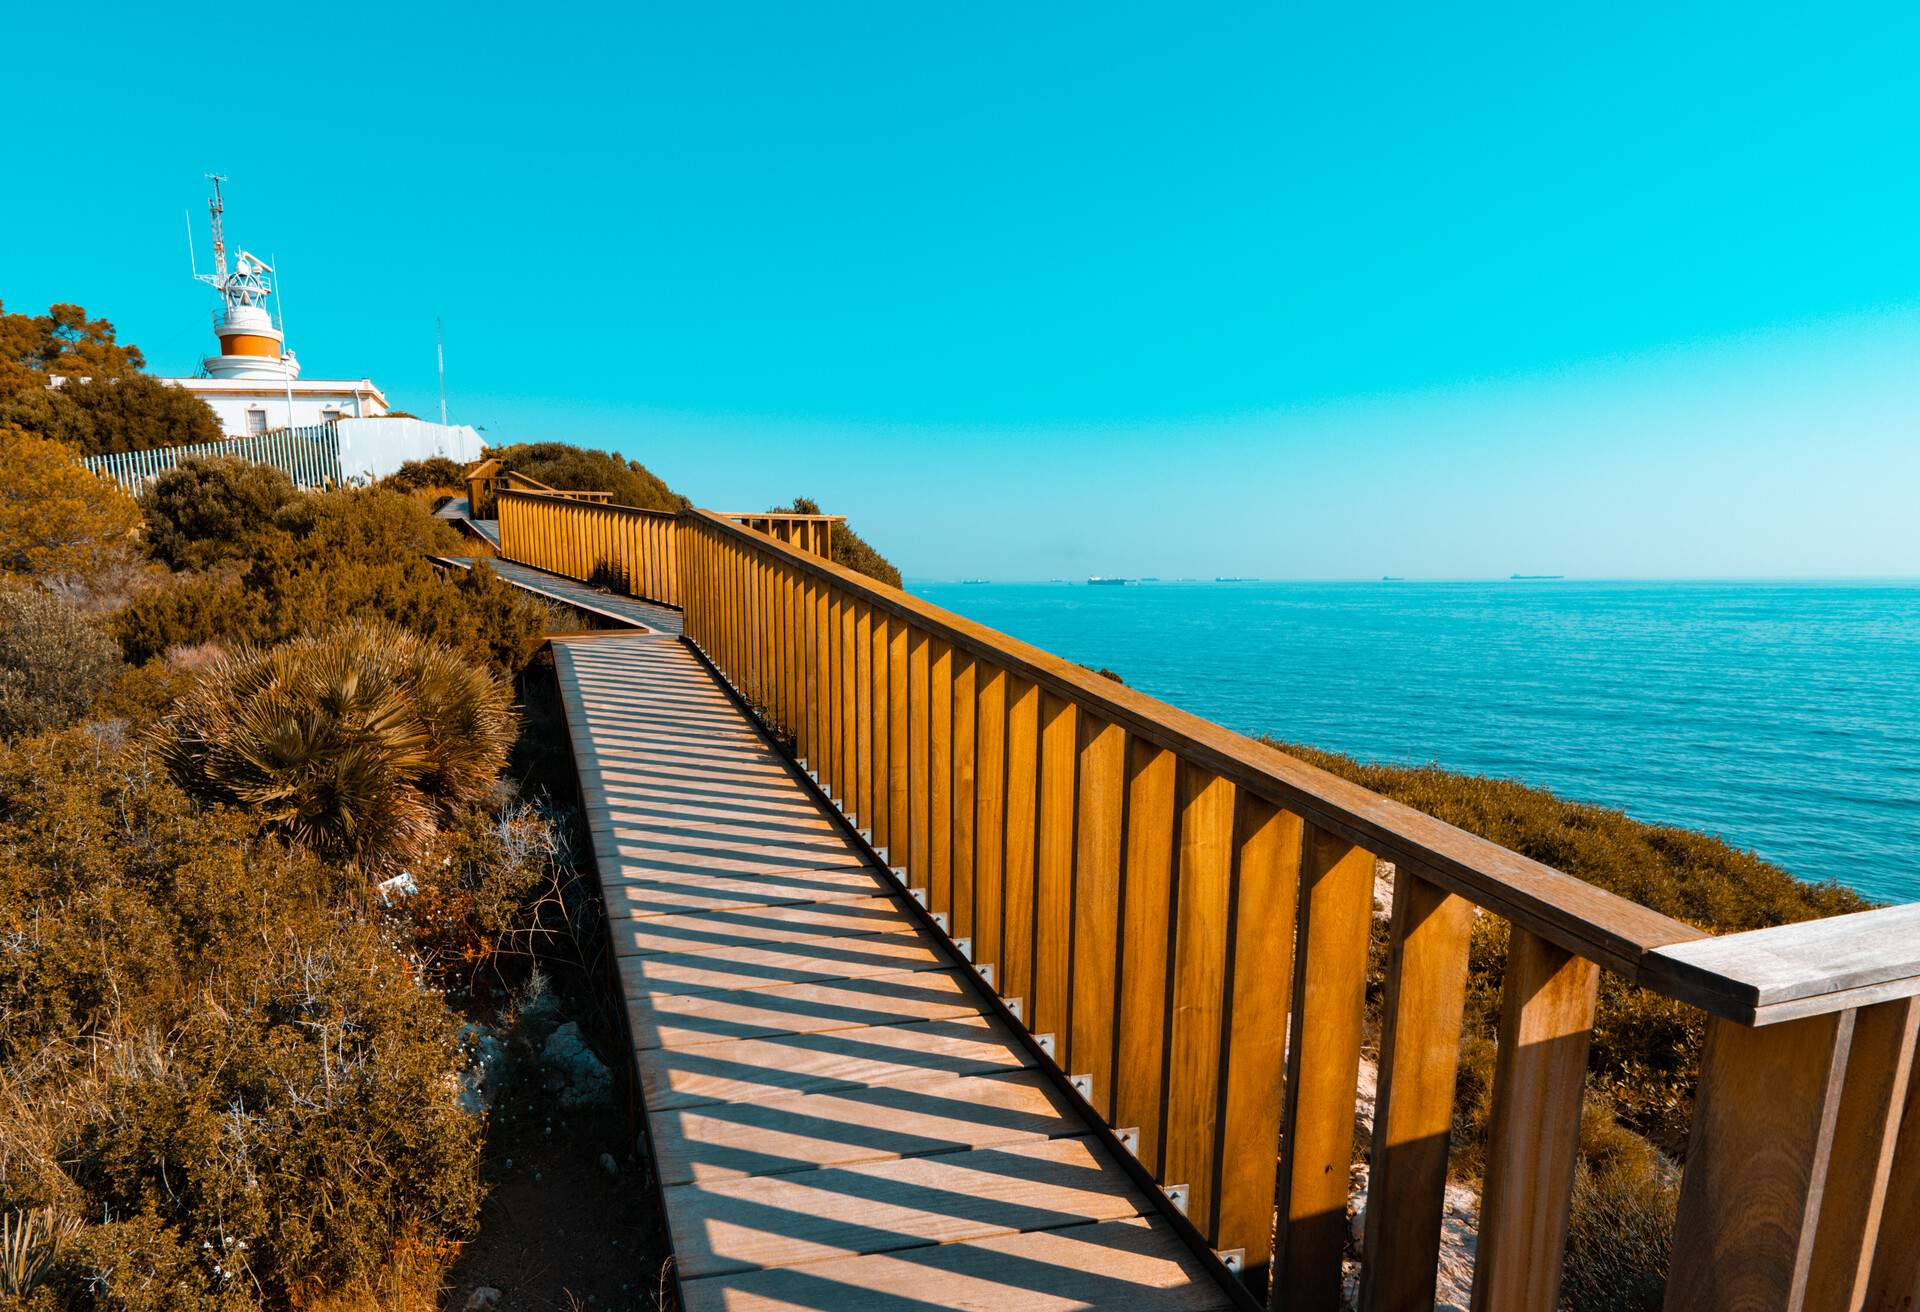 Vanishing point to old lighthouse of Salou in Costa Daurada. Mediterranean sea coast in Spain. Orange and teal style.